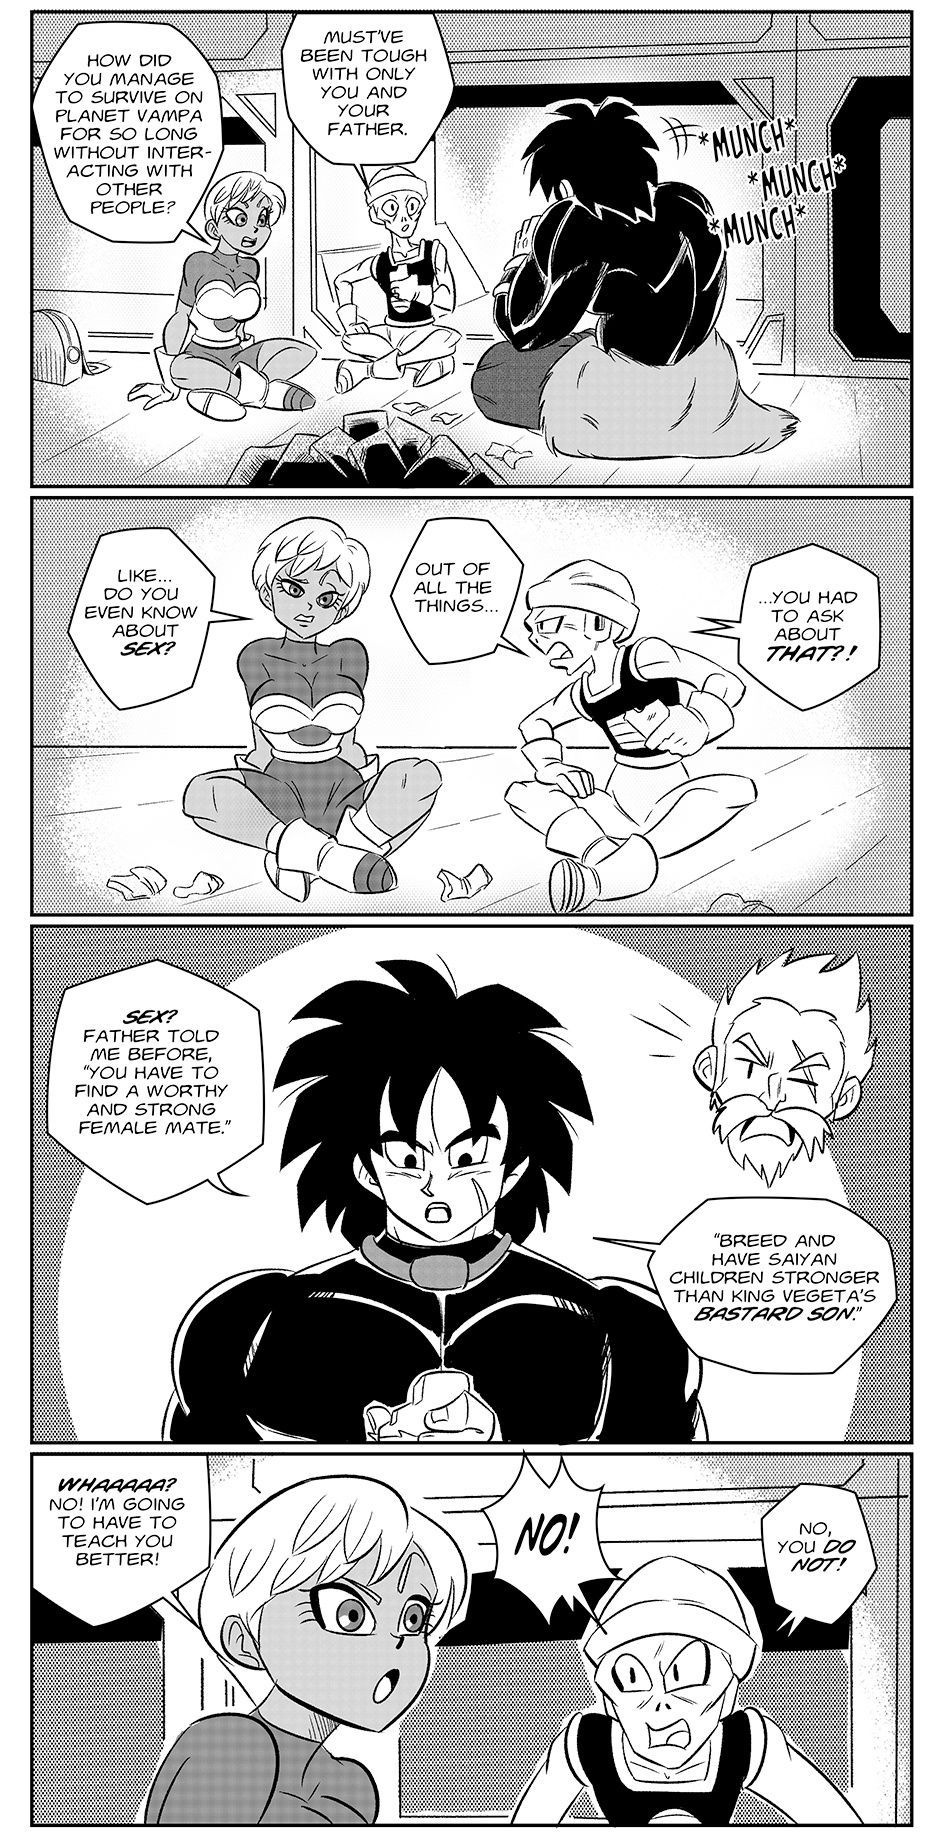 [FunsexyDB] Missed Opportunity (Dragon Ball Super) 2